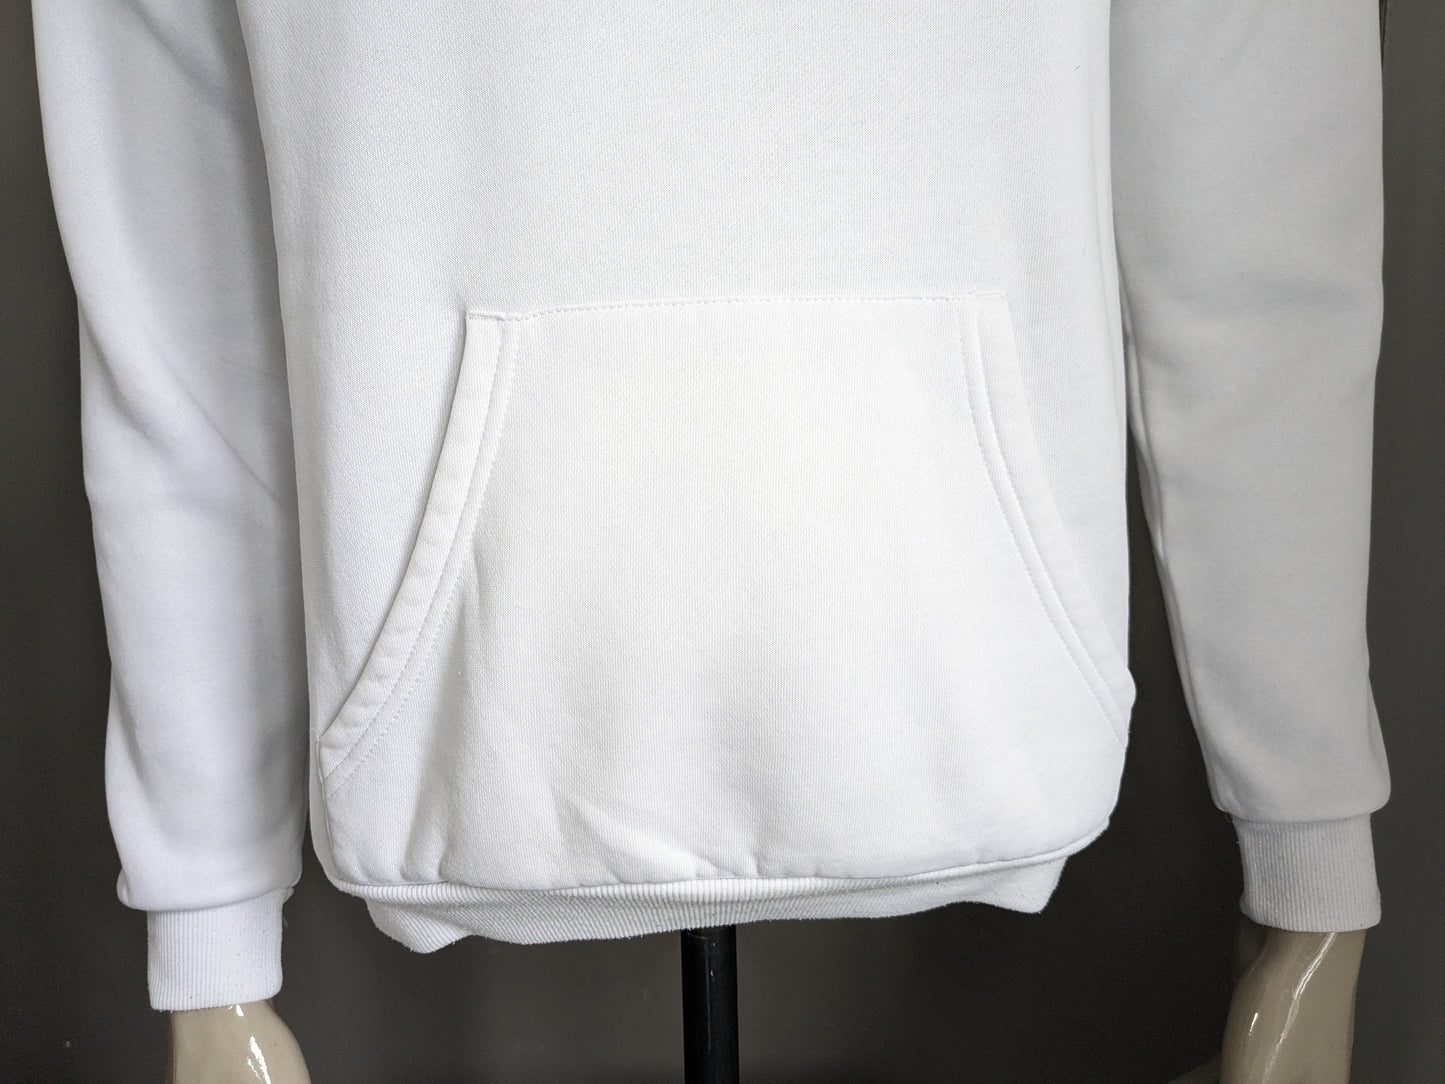 Sidemen Official Hoodie. White. Size S.